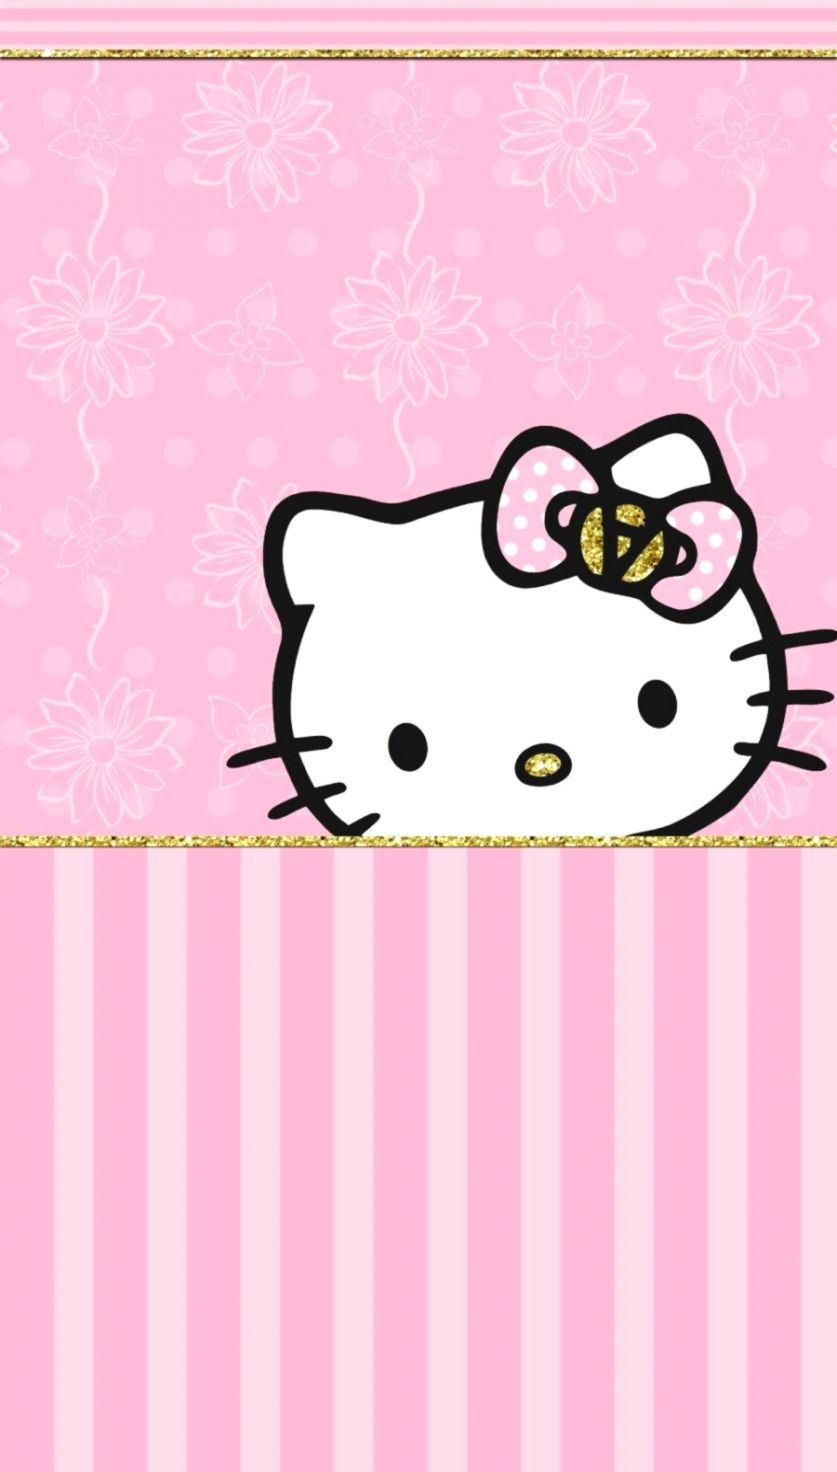 Android Hello Kitty Wallpaper Amazing Wallpaper HD Hello within The Brilliant Hello Kitty. Hello kitty wallpaper hd, Hello kitty wallpaper, Pink wallpaper android